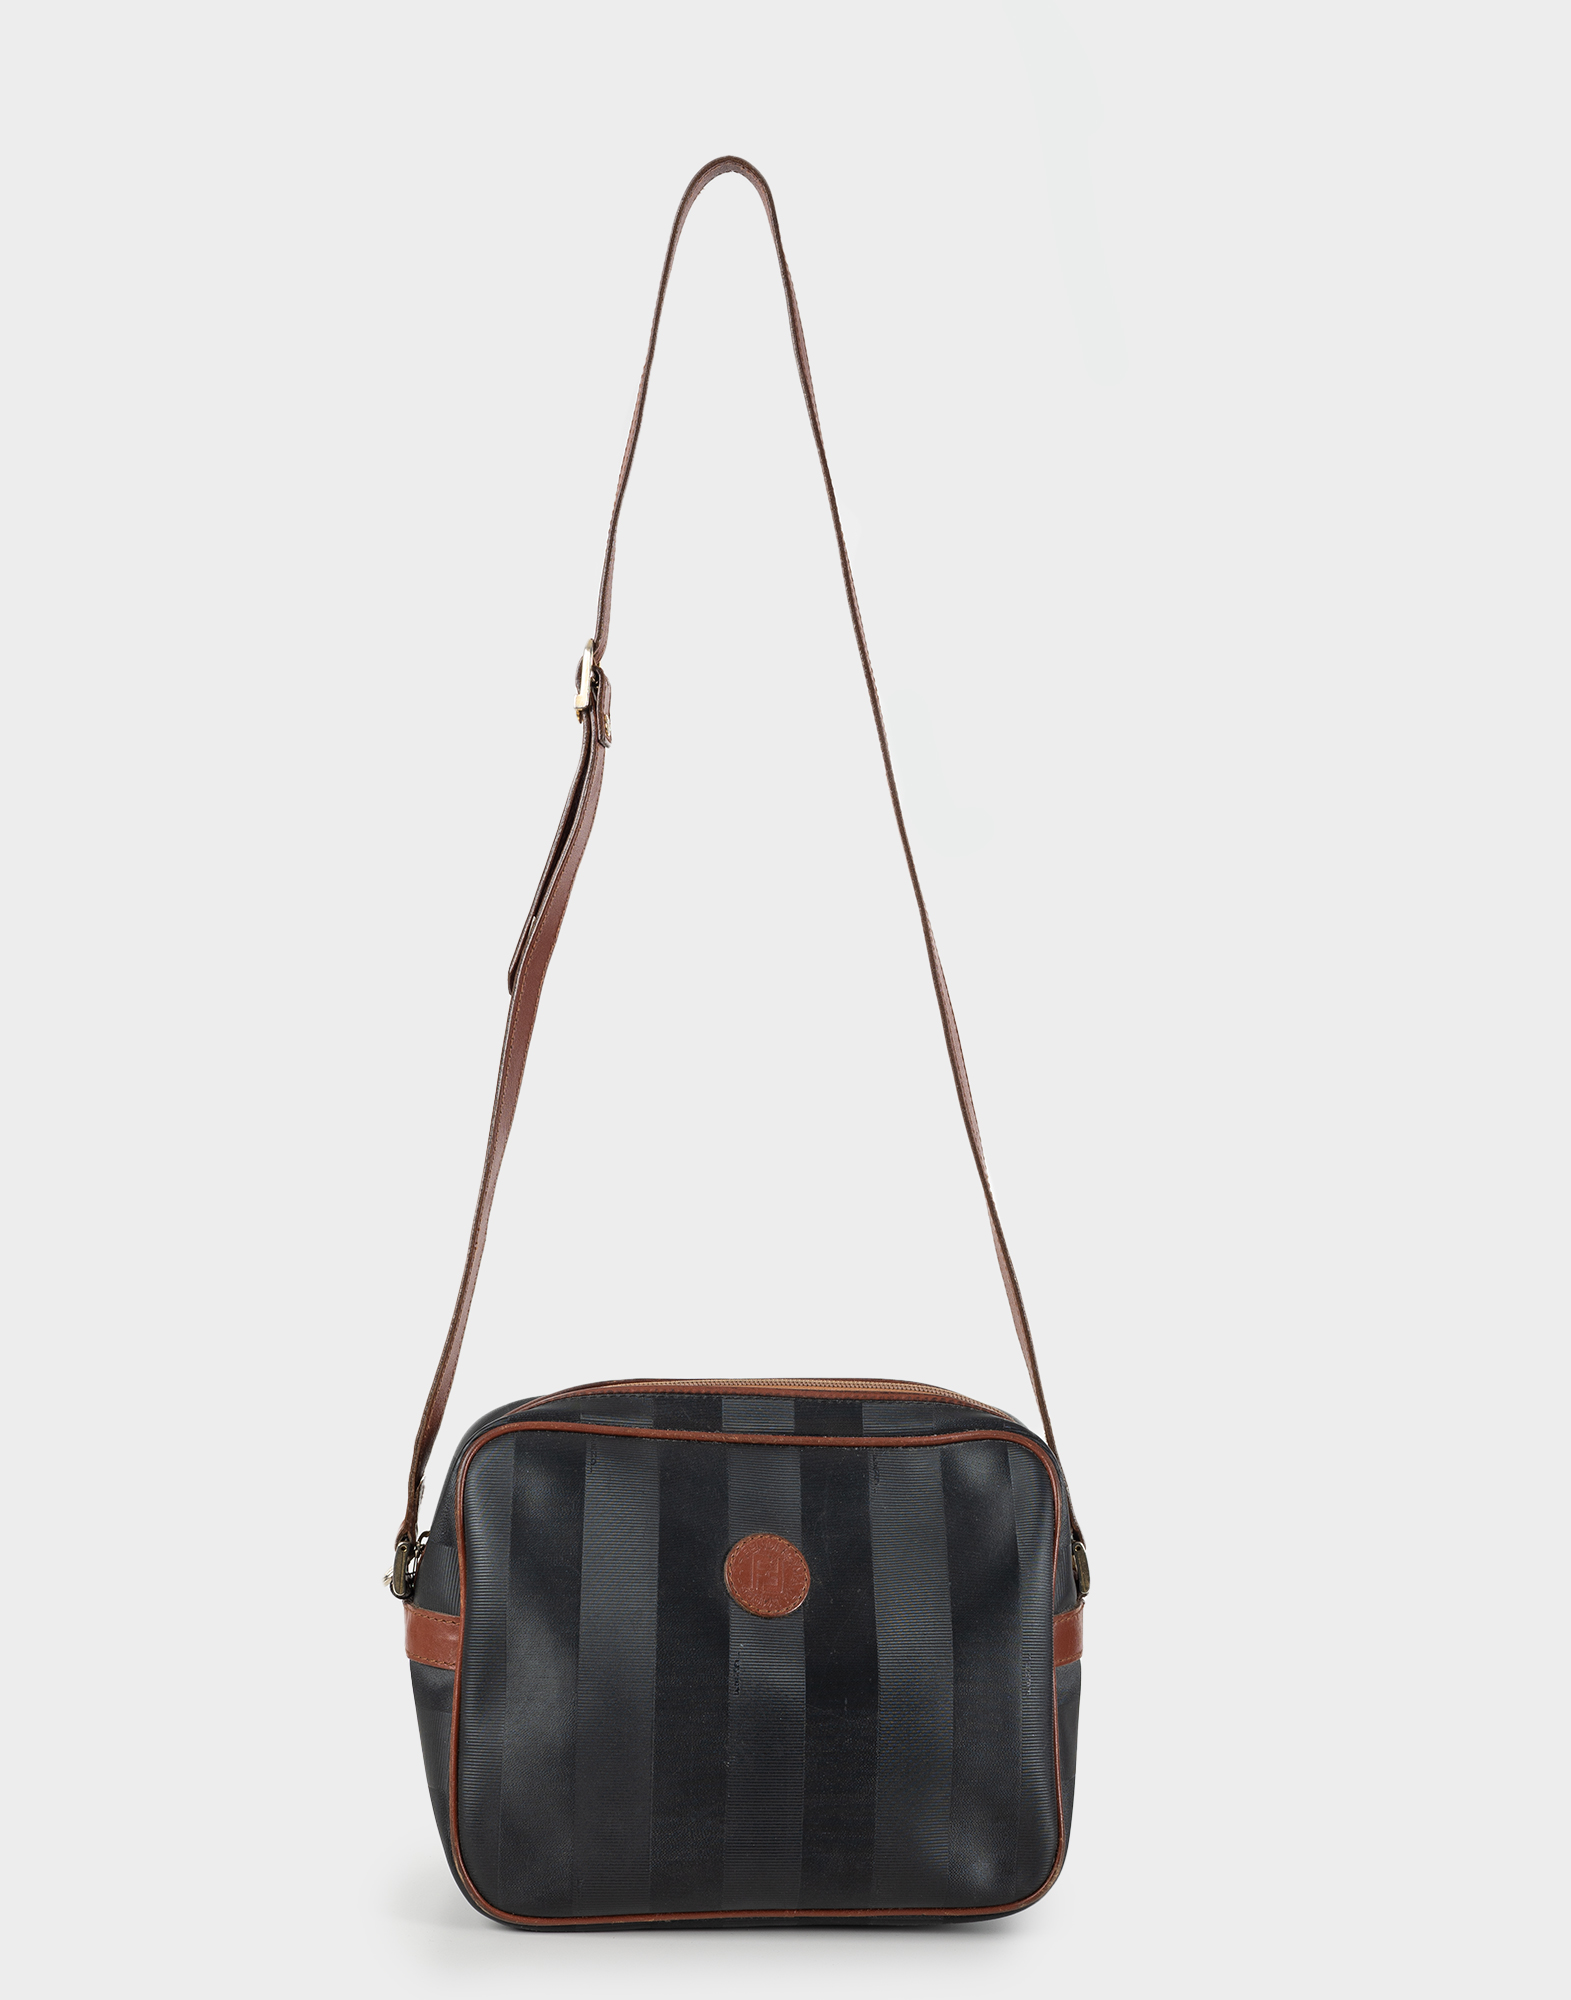 black canvas women's bag with striped pattern and brown leather shoulder strap